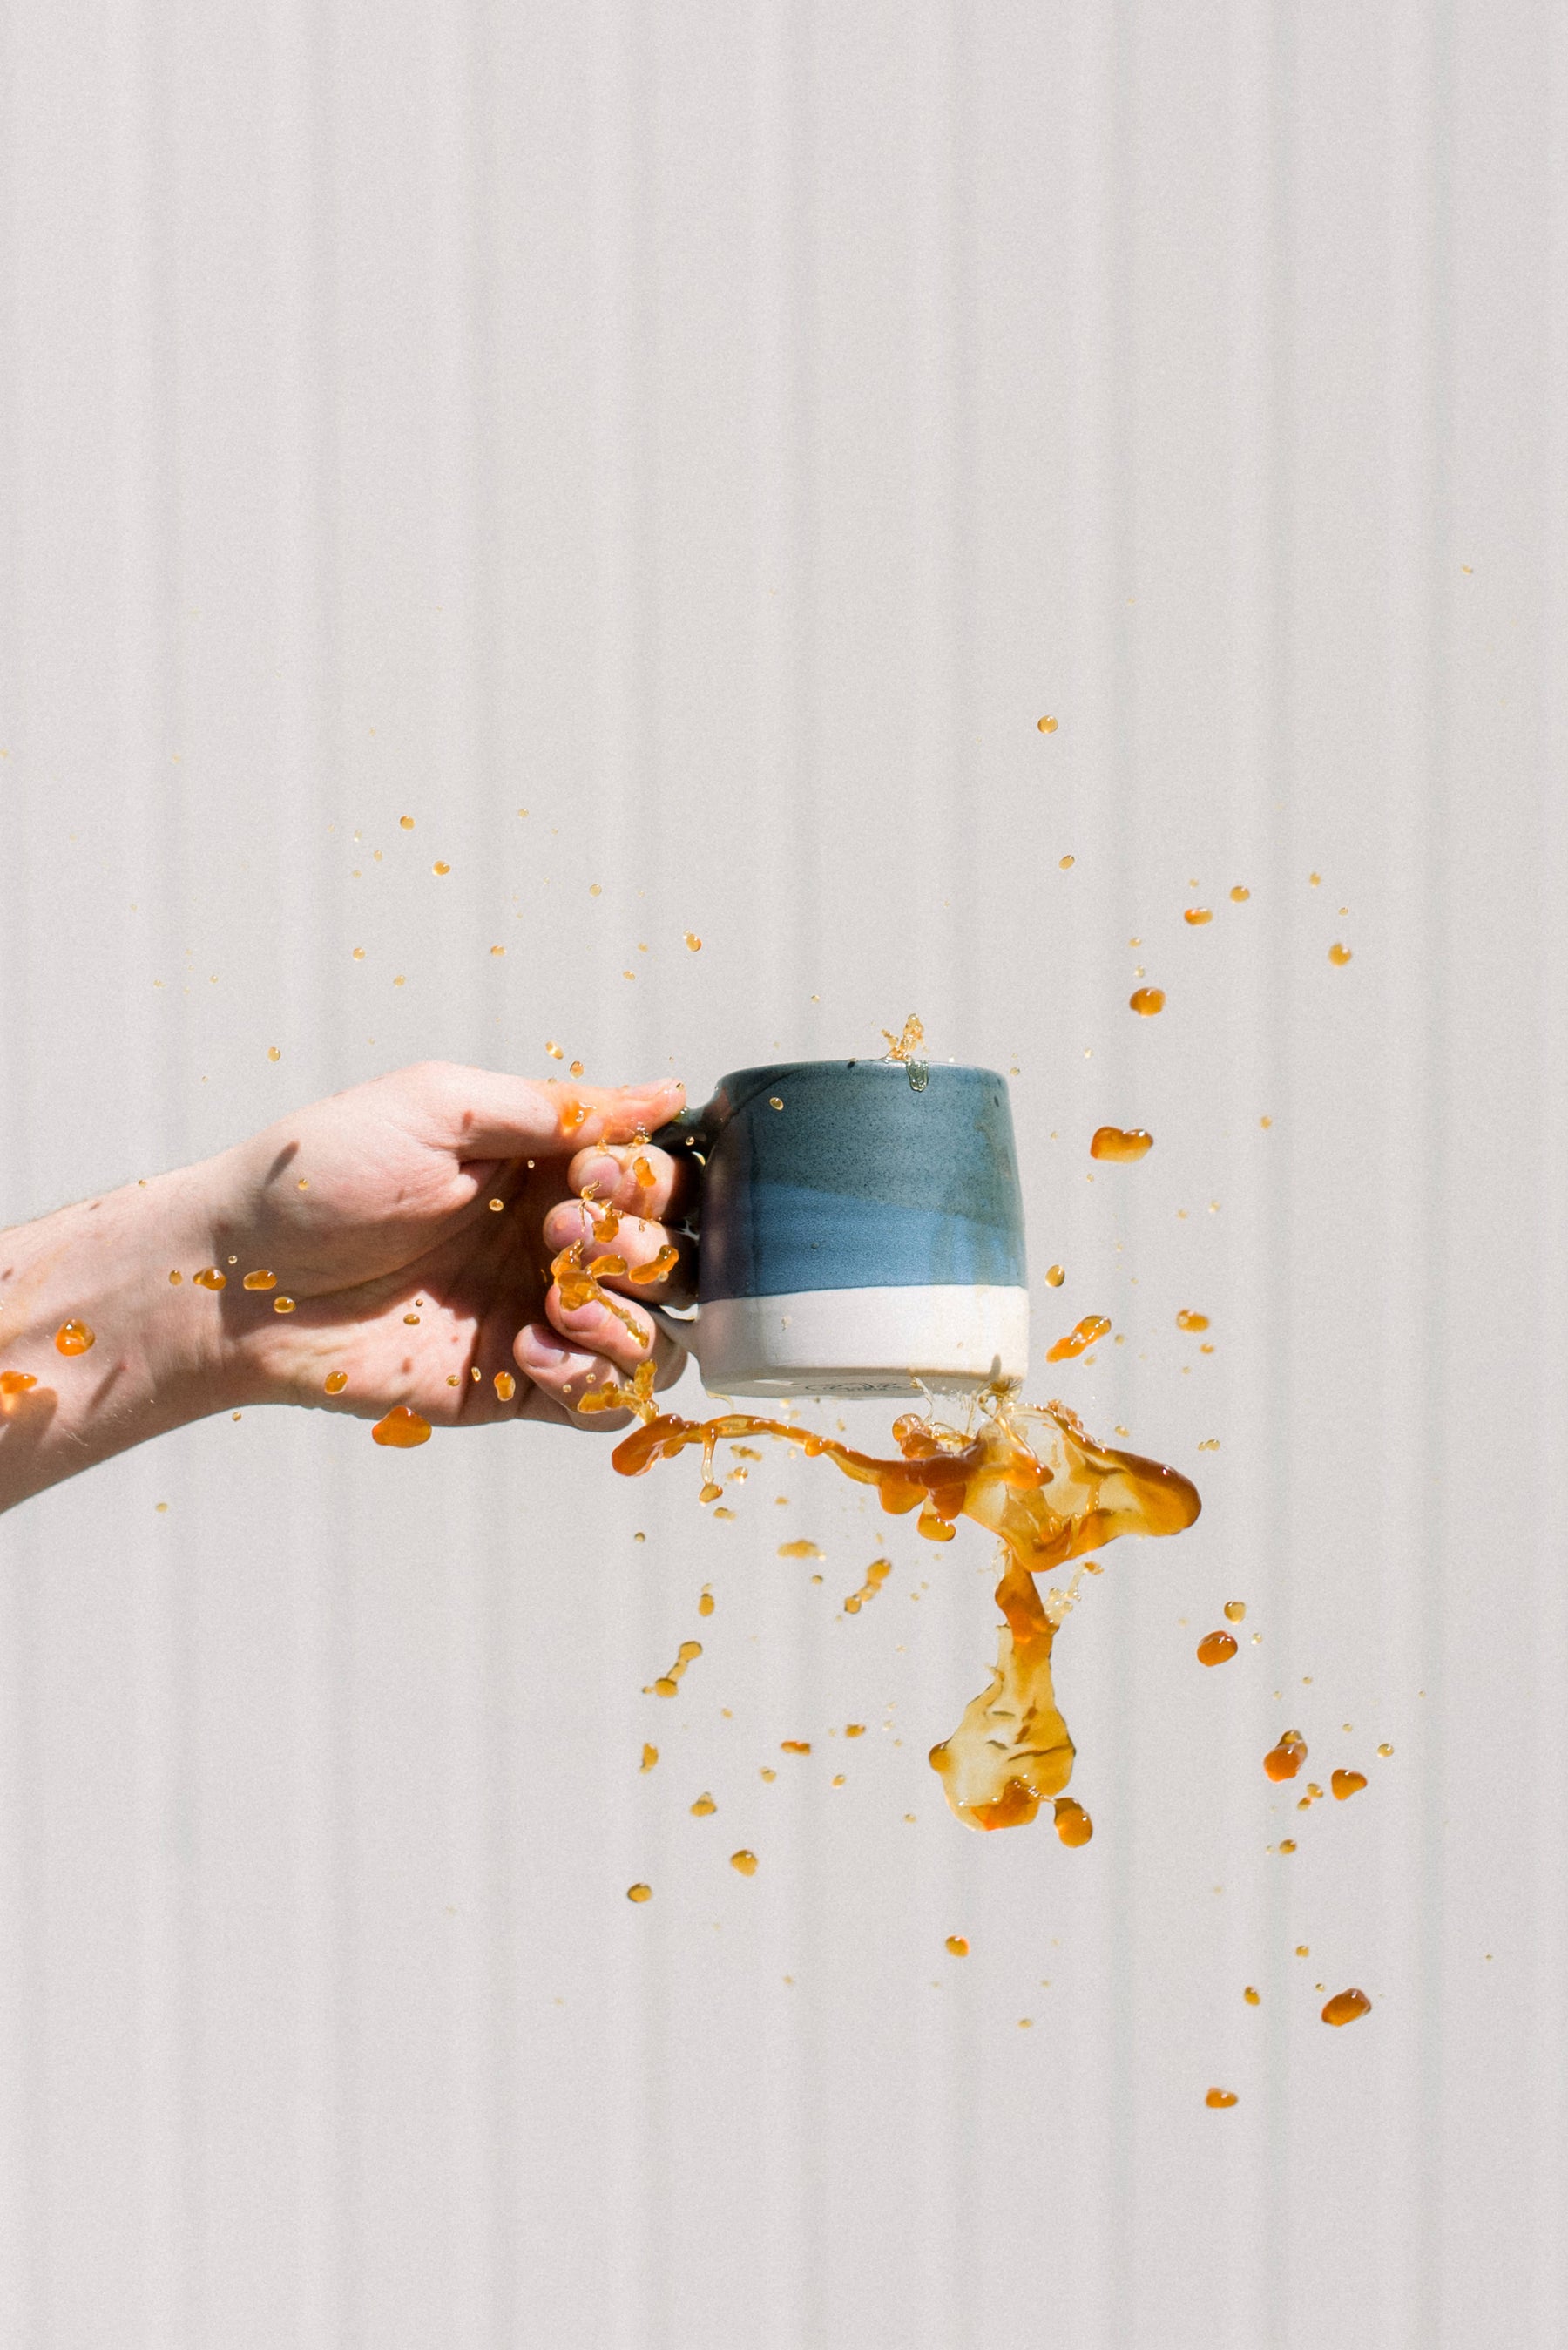 Coffee spilling out of mug against white wall